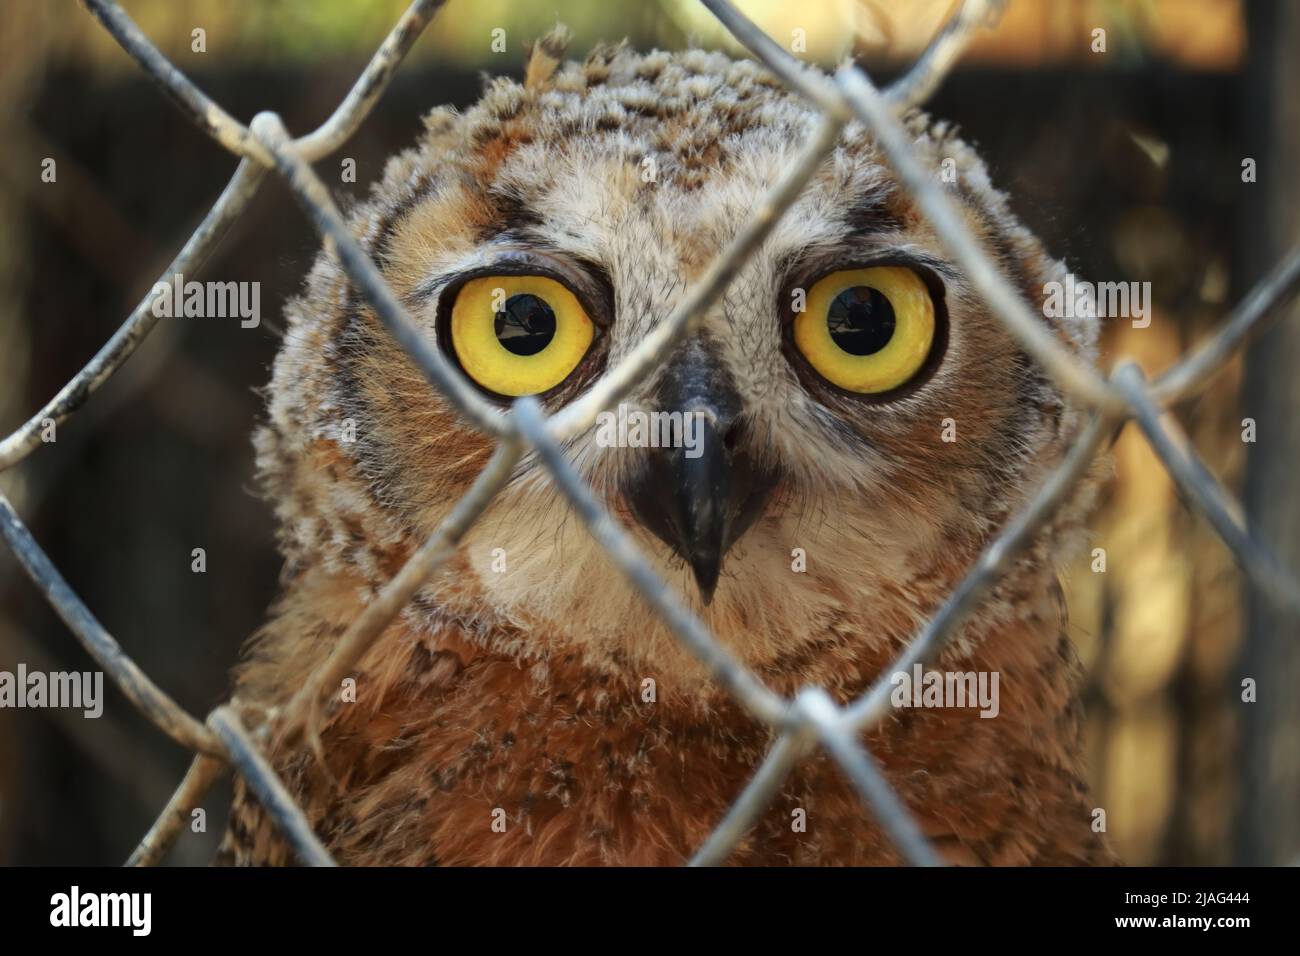 A little owl behind in its cage. Big yellow and black eyes Stock Photo